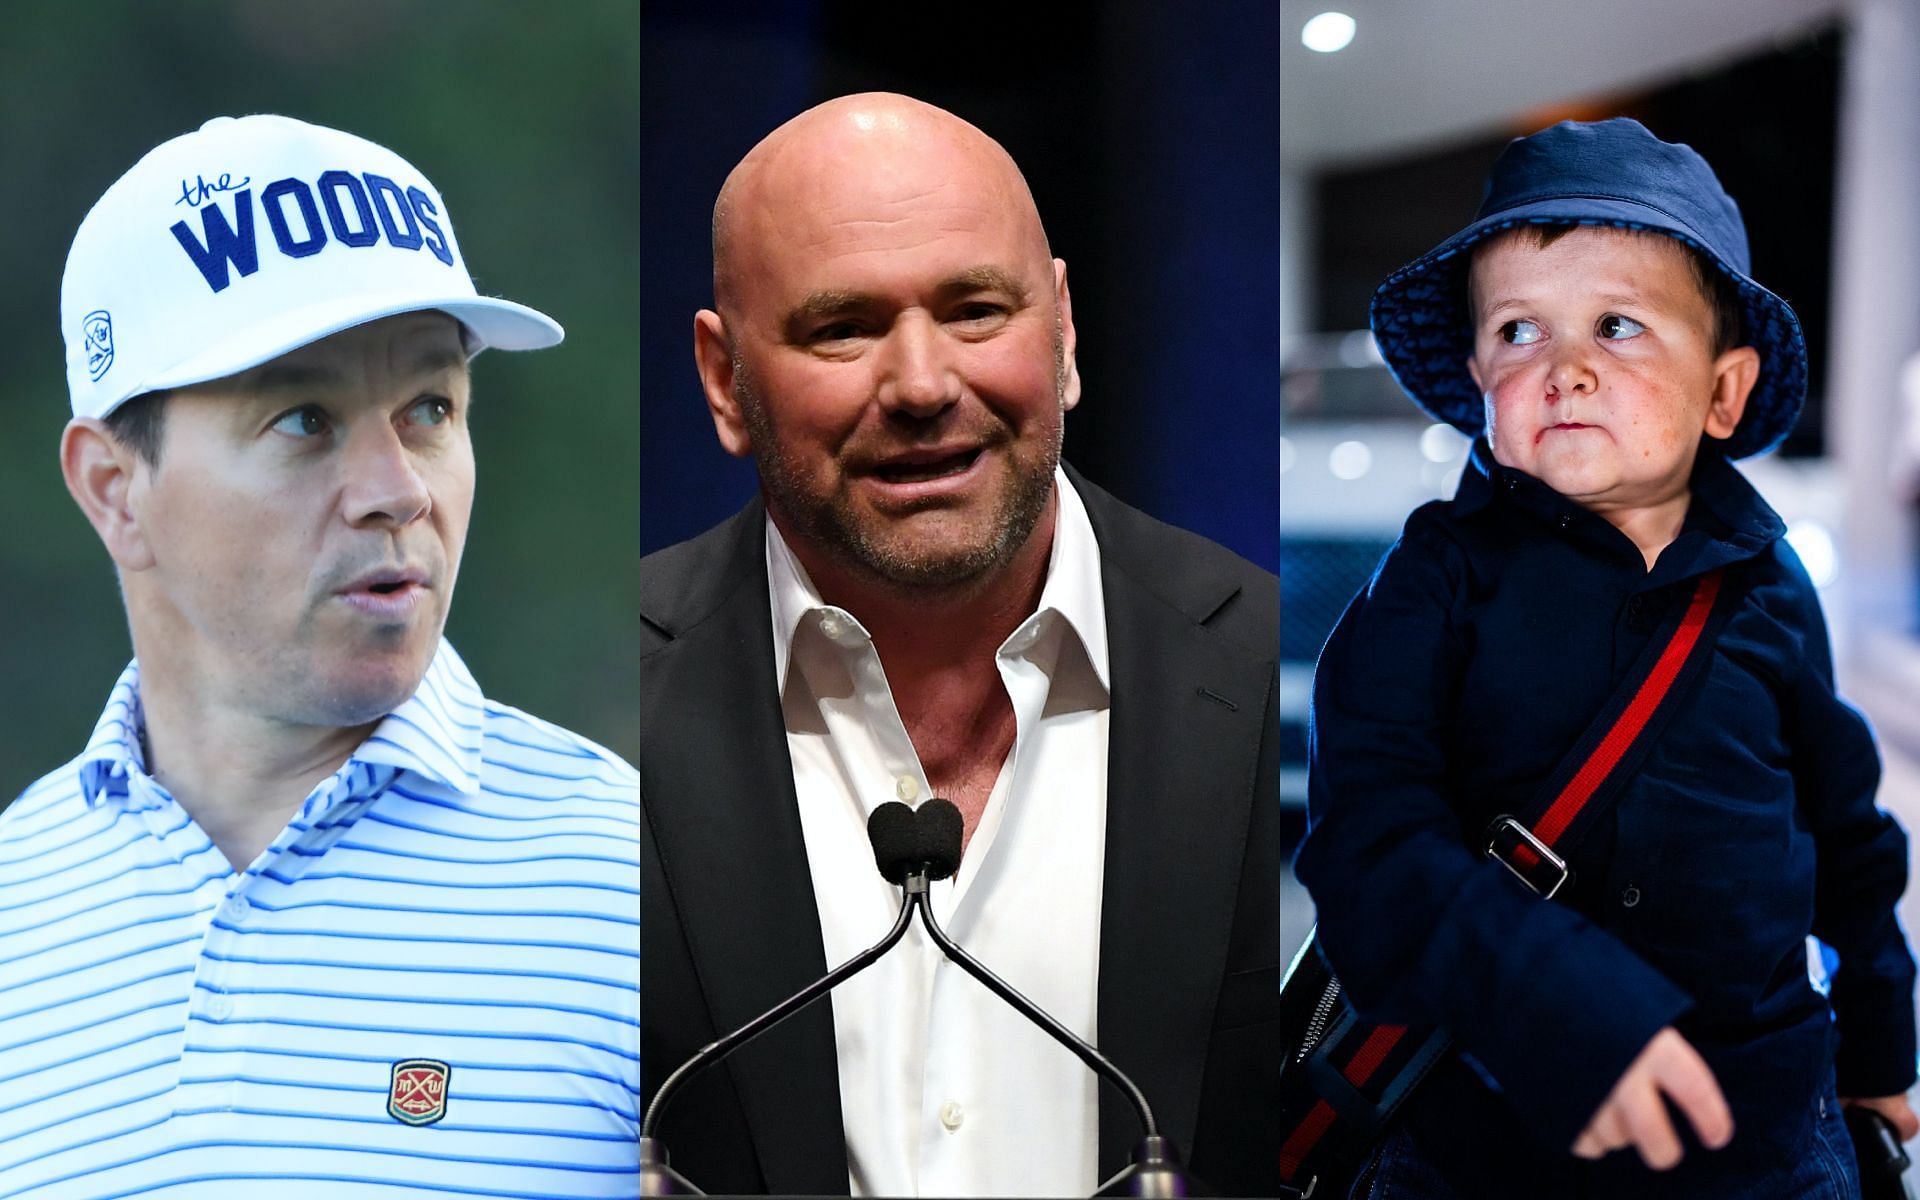 From the left- Mark Wahlberg, Dana White and Hasbulla [Image credits: Getty Images and @HasbullaHive on Twitter]